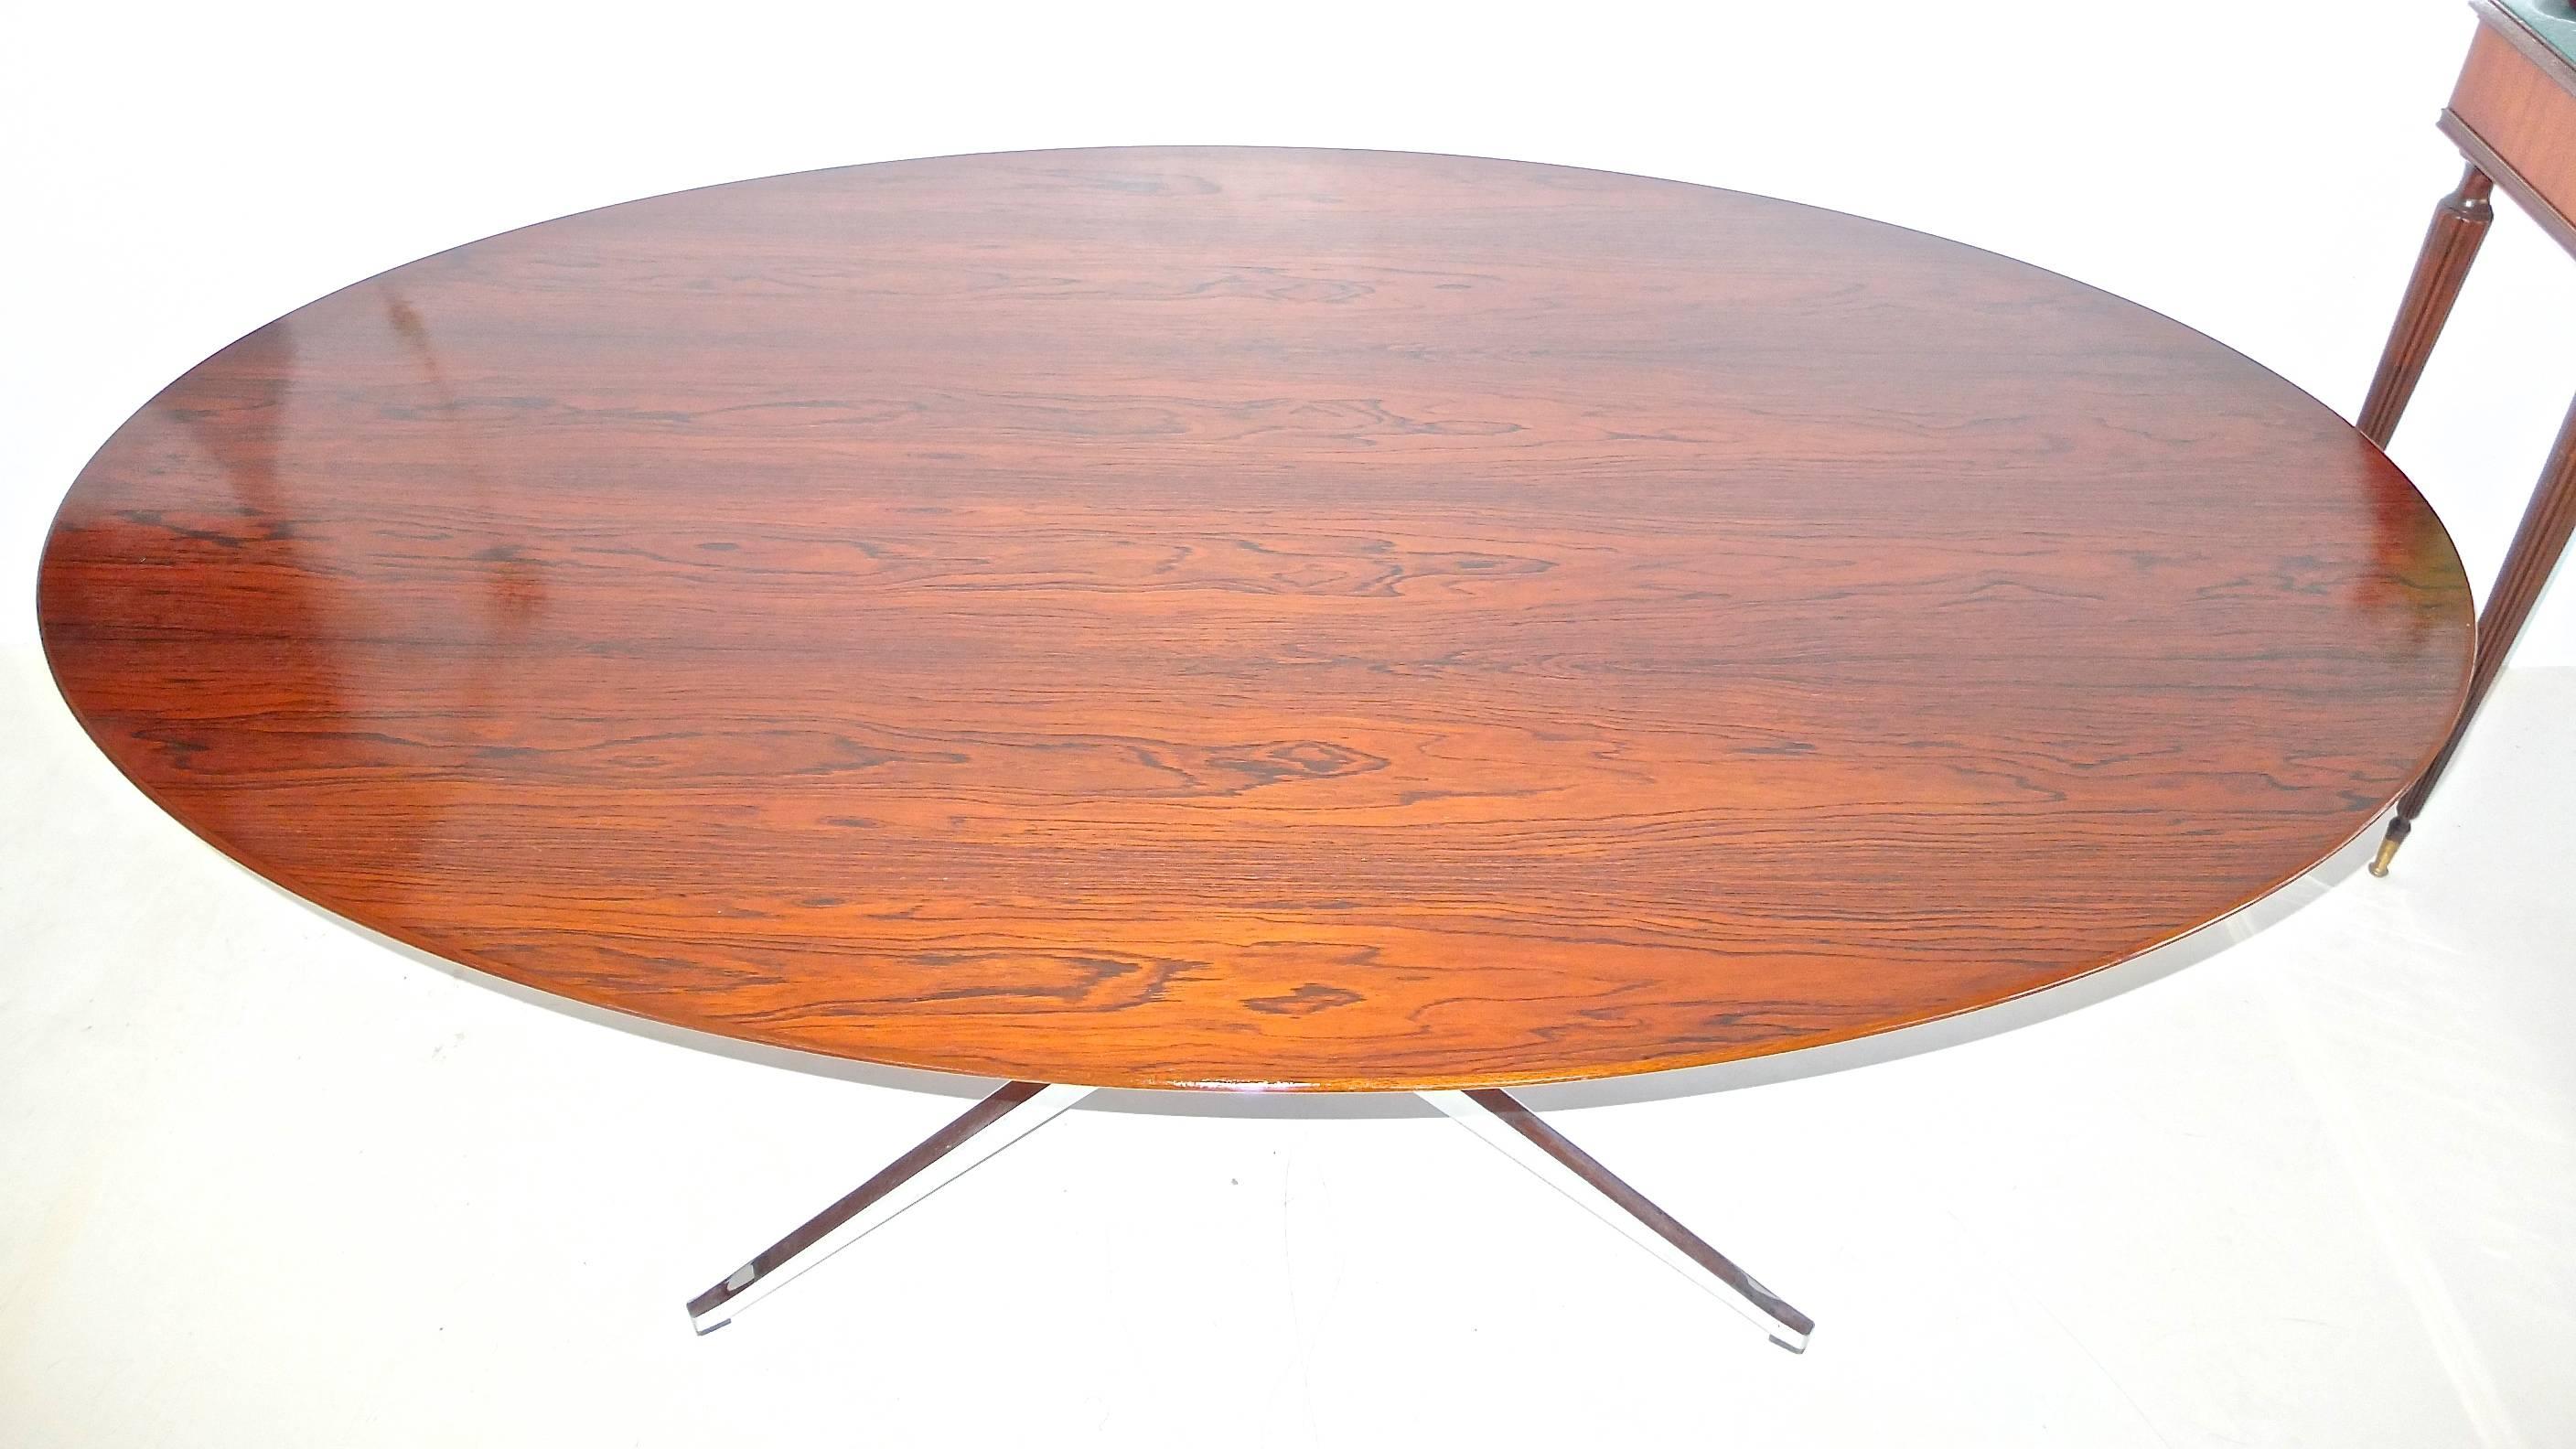 Polished Brazilian Rosewood Elliptical Oval Executive Table Desk by Florence Knoll